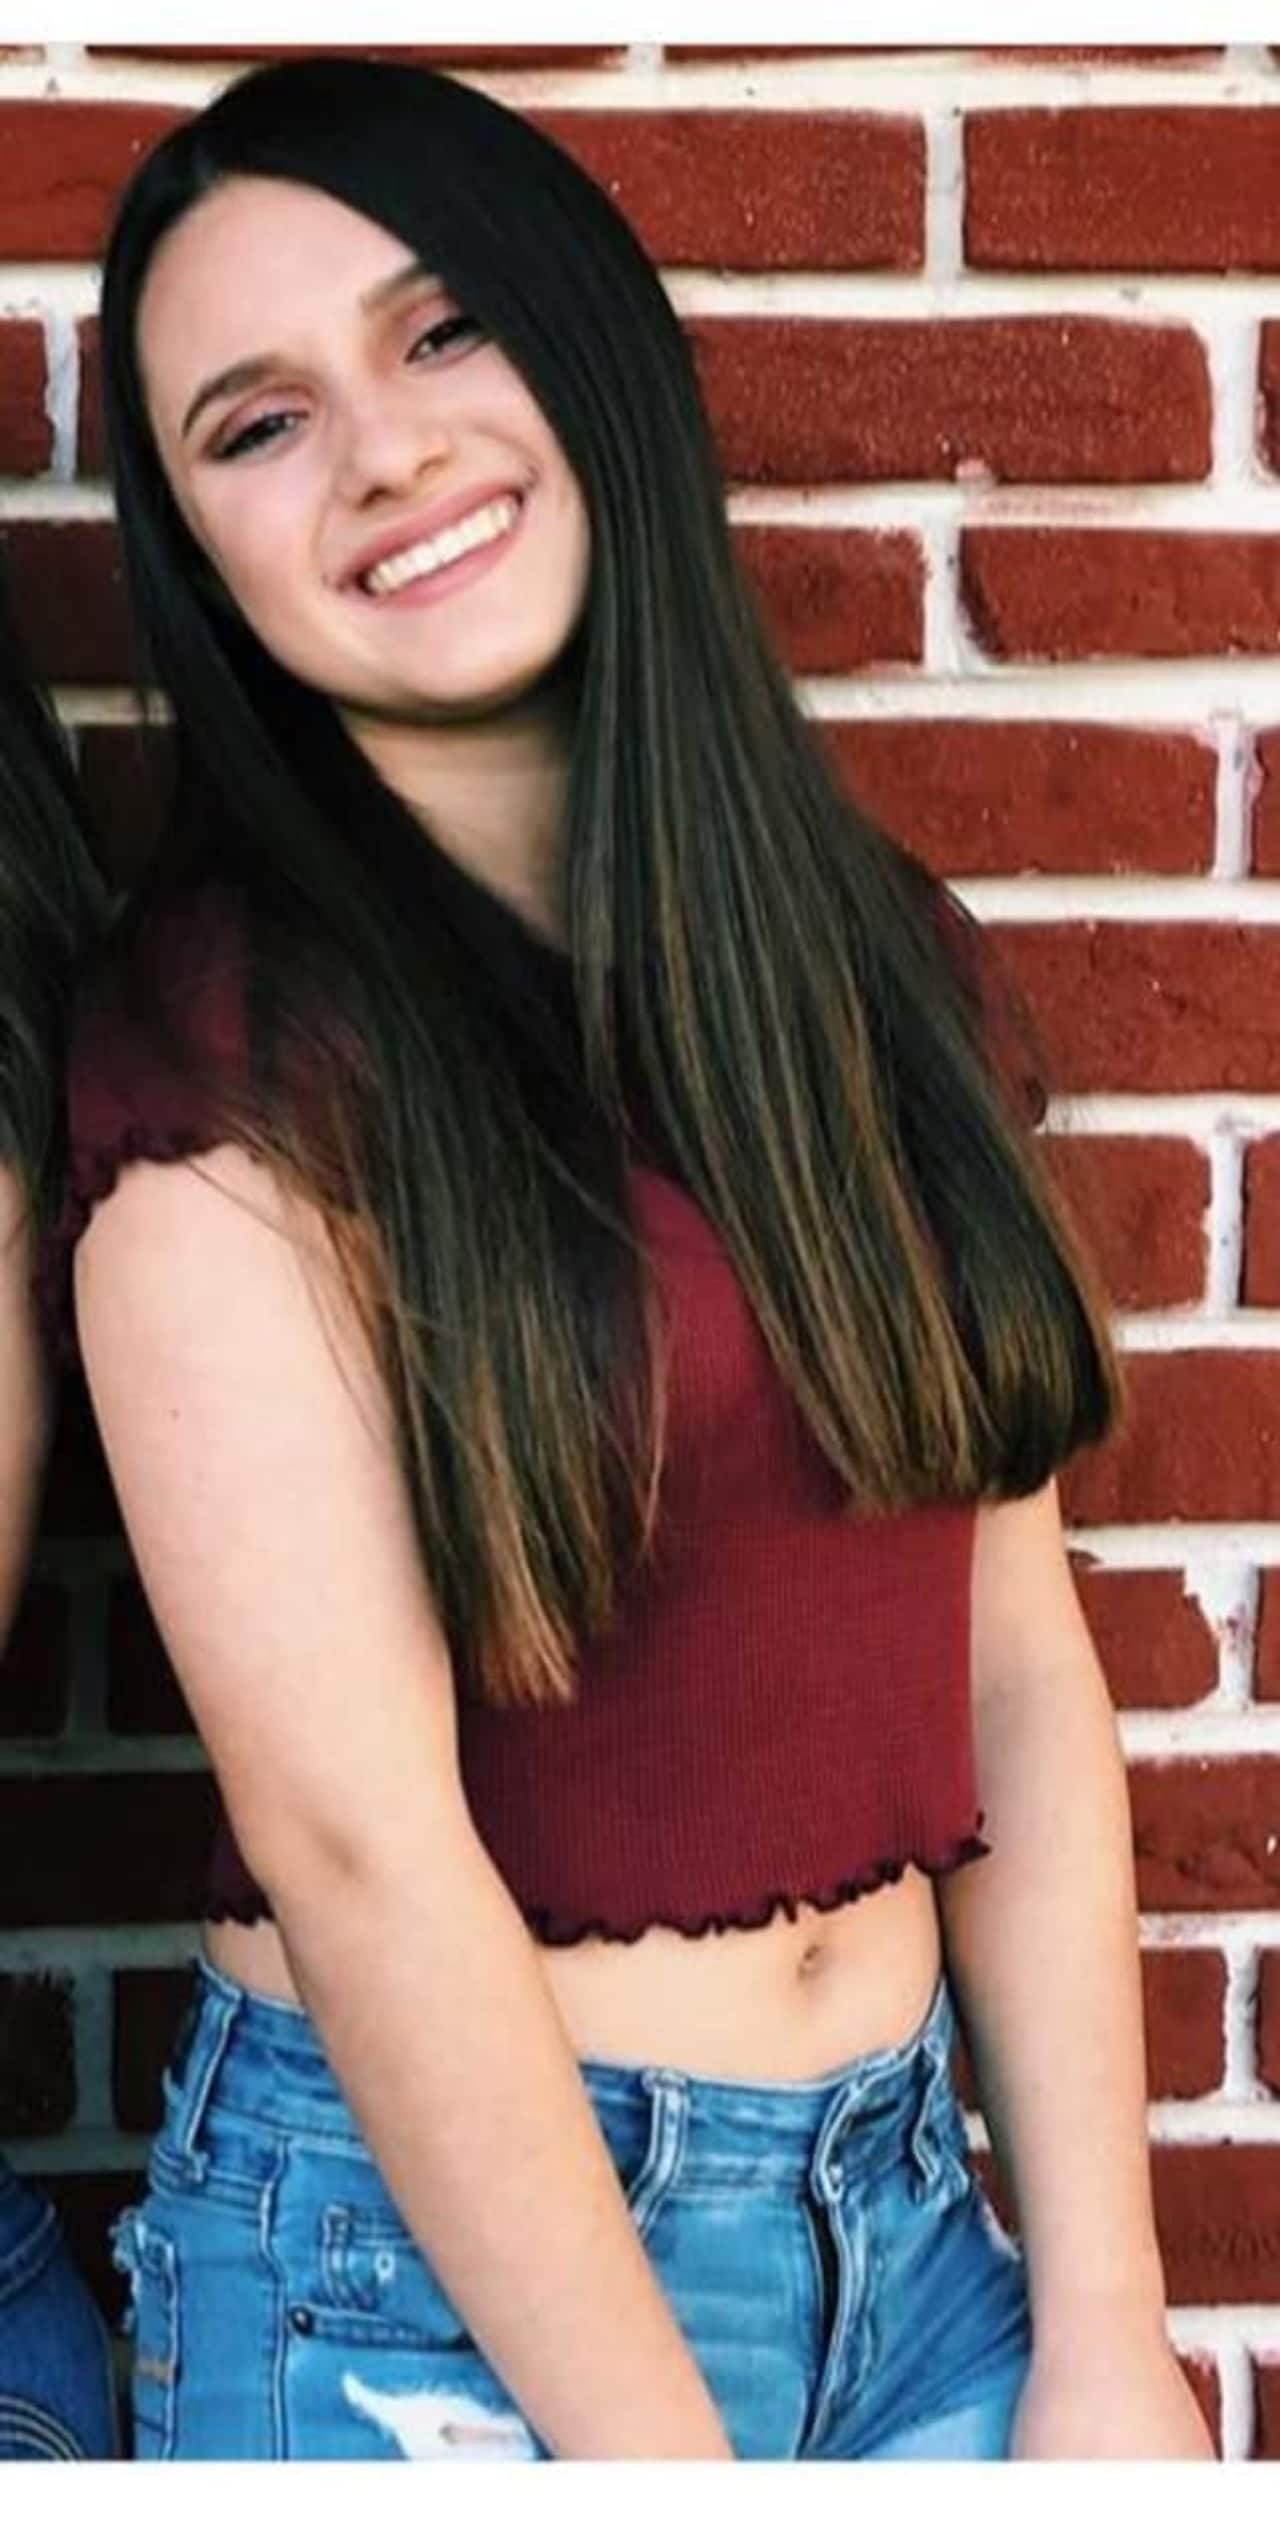 Alyssa Alhadeff formerly of Woodcliff Lake died in the Parkland school massacre.